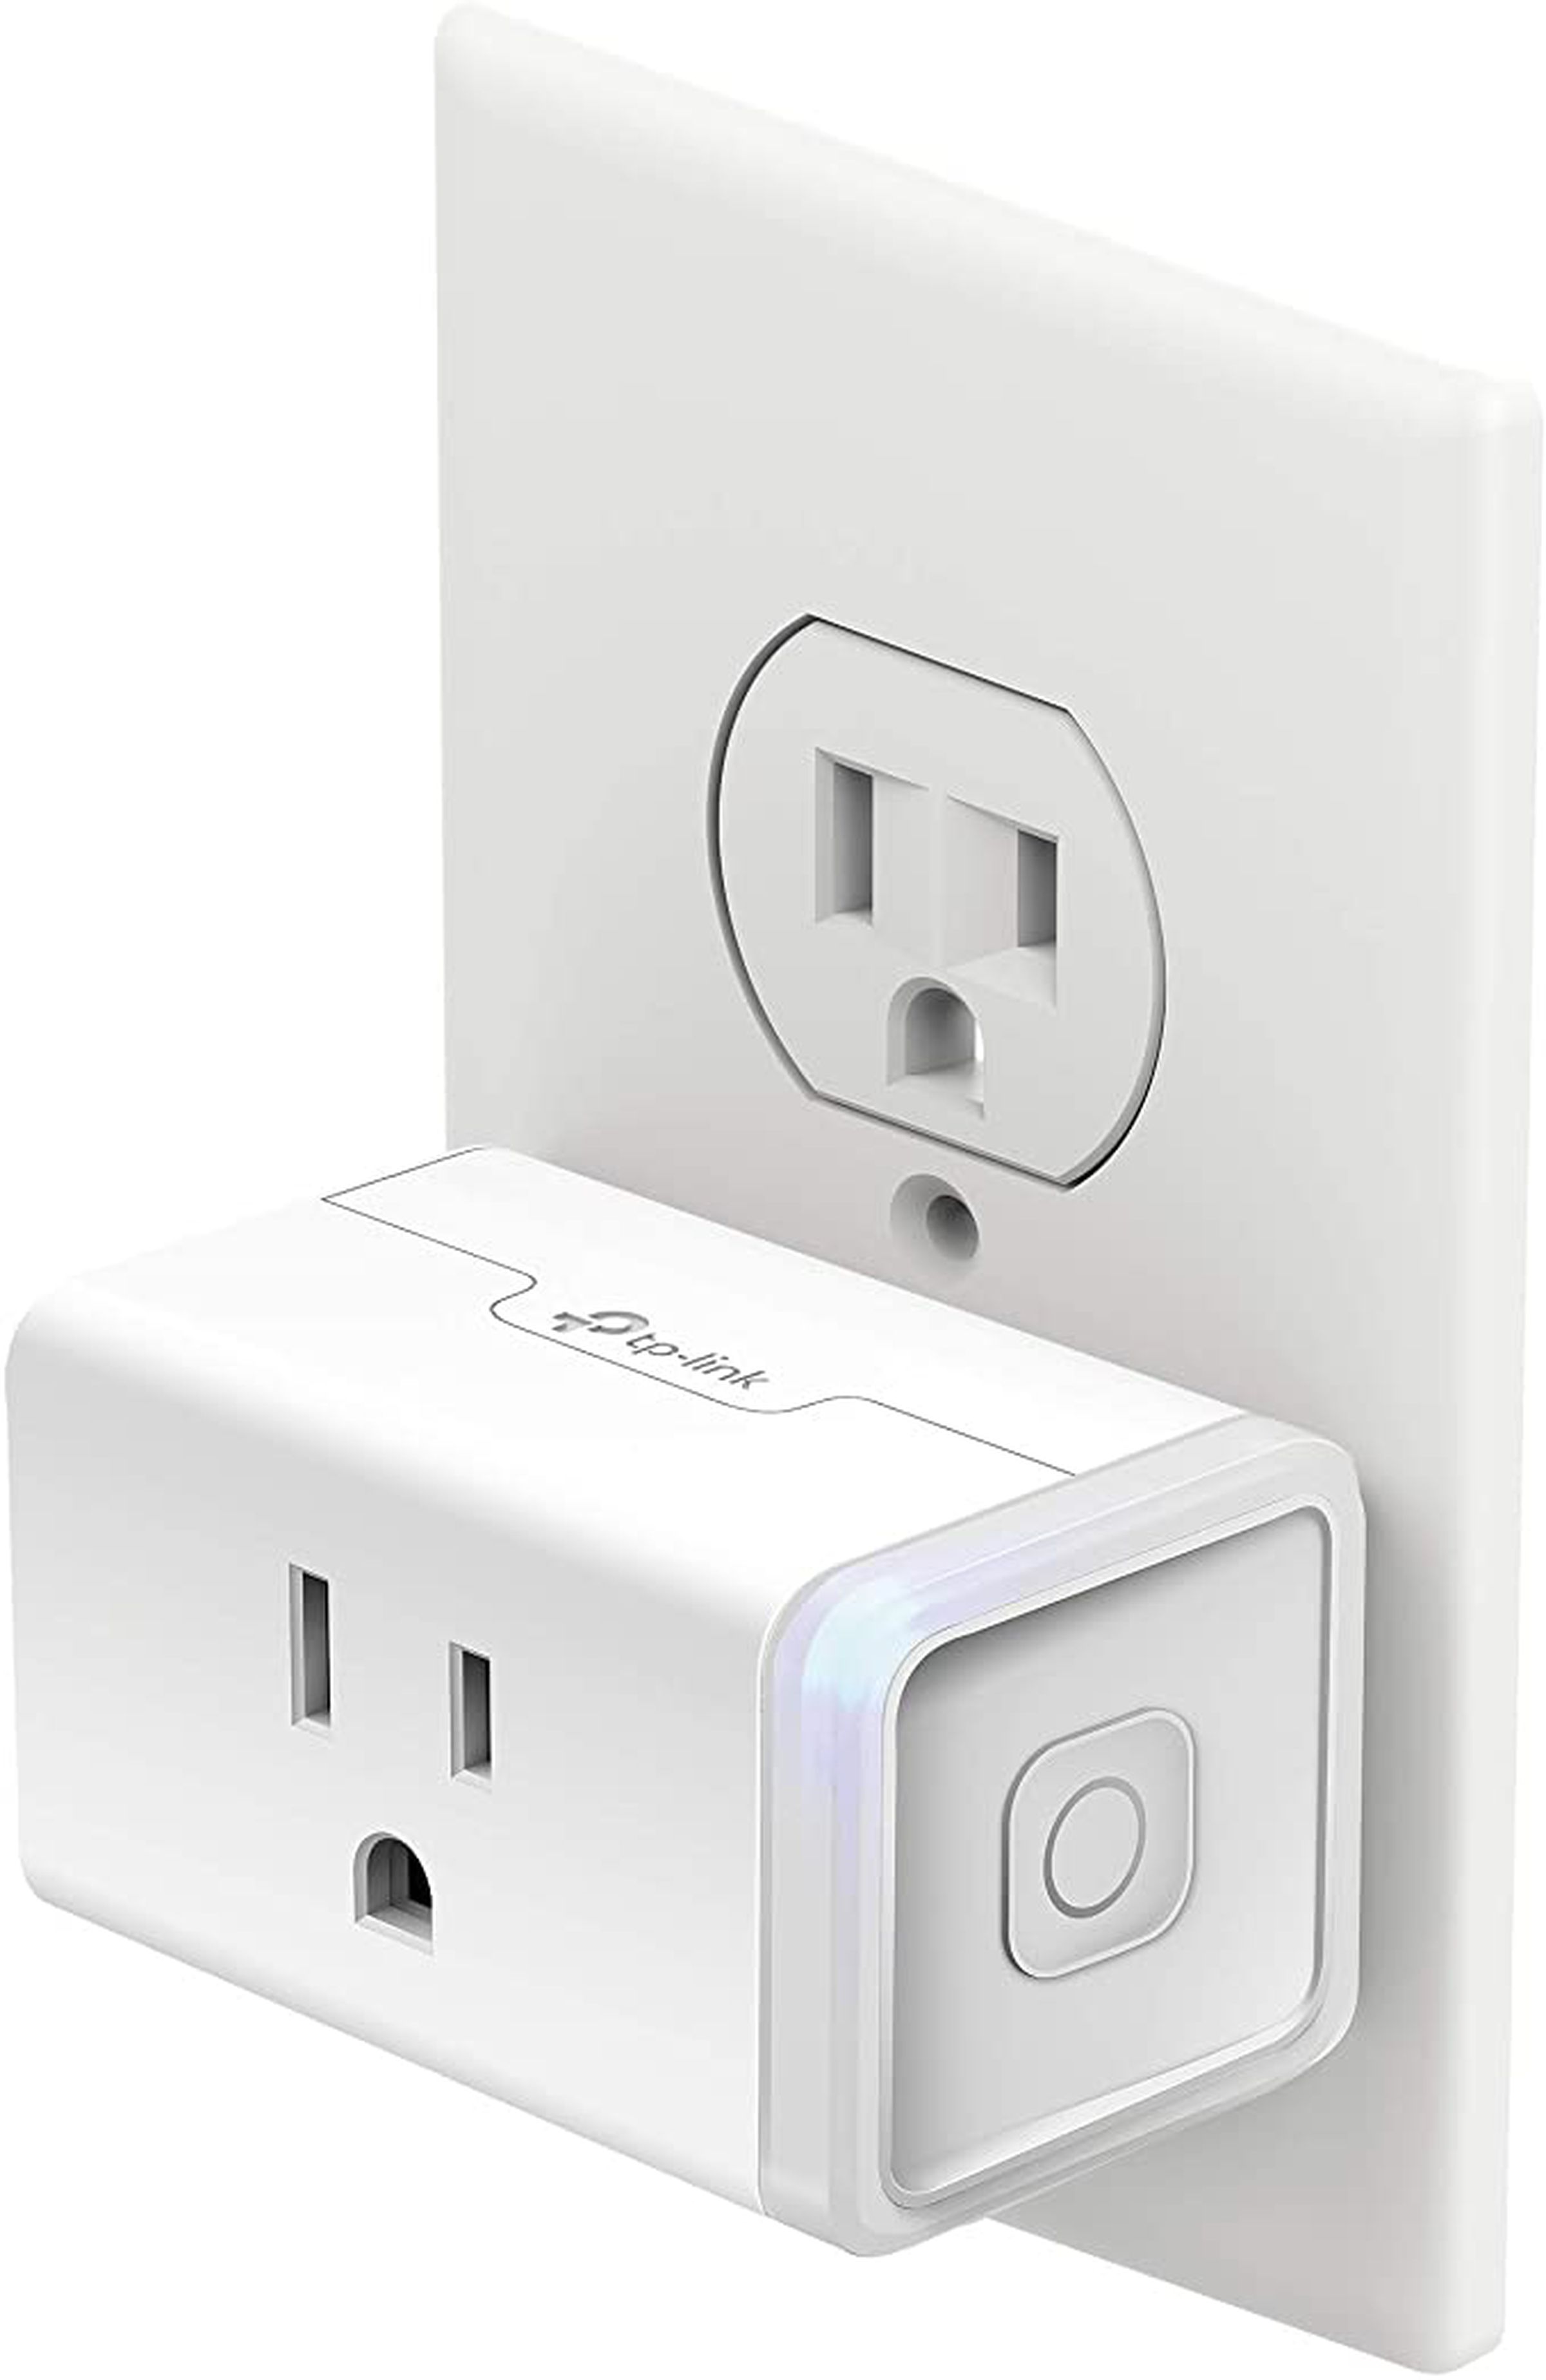 The Kasa Mini smart plug only covers one outlet, unlike some smart plugs.